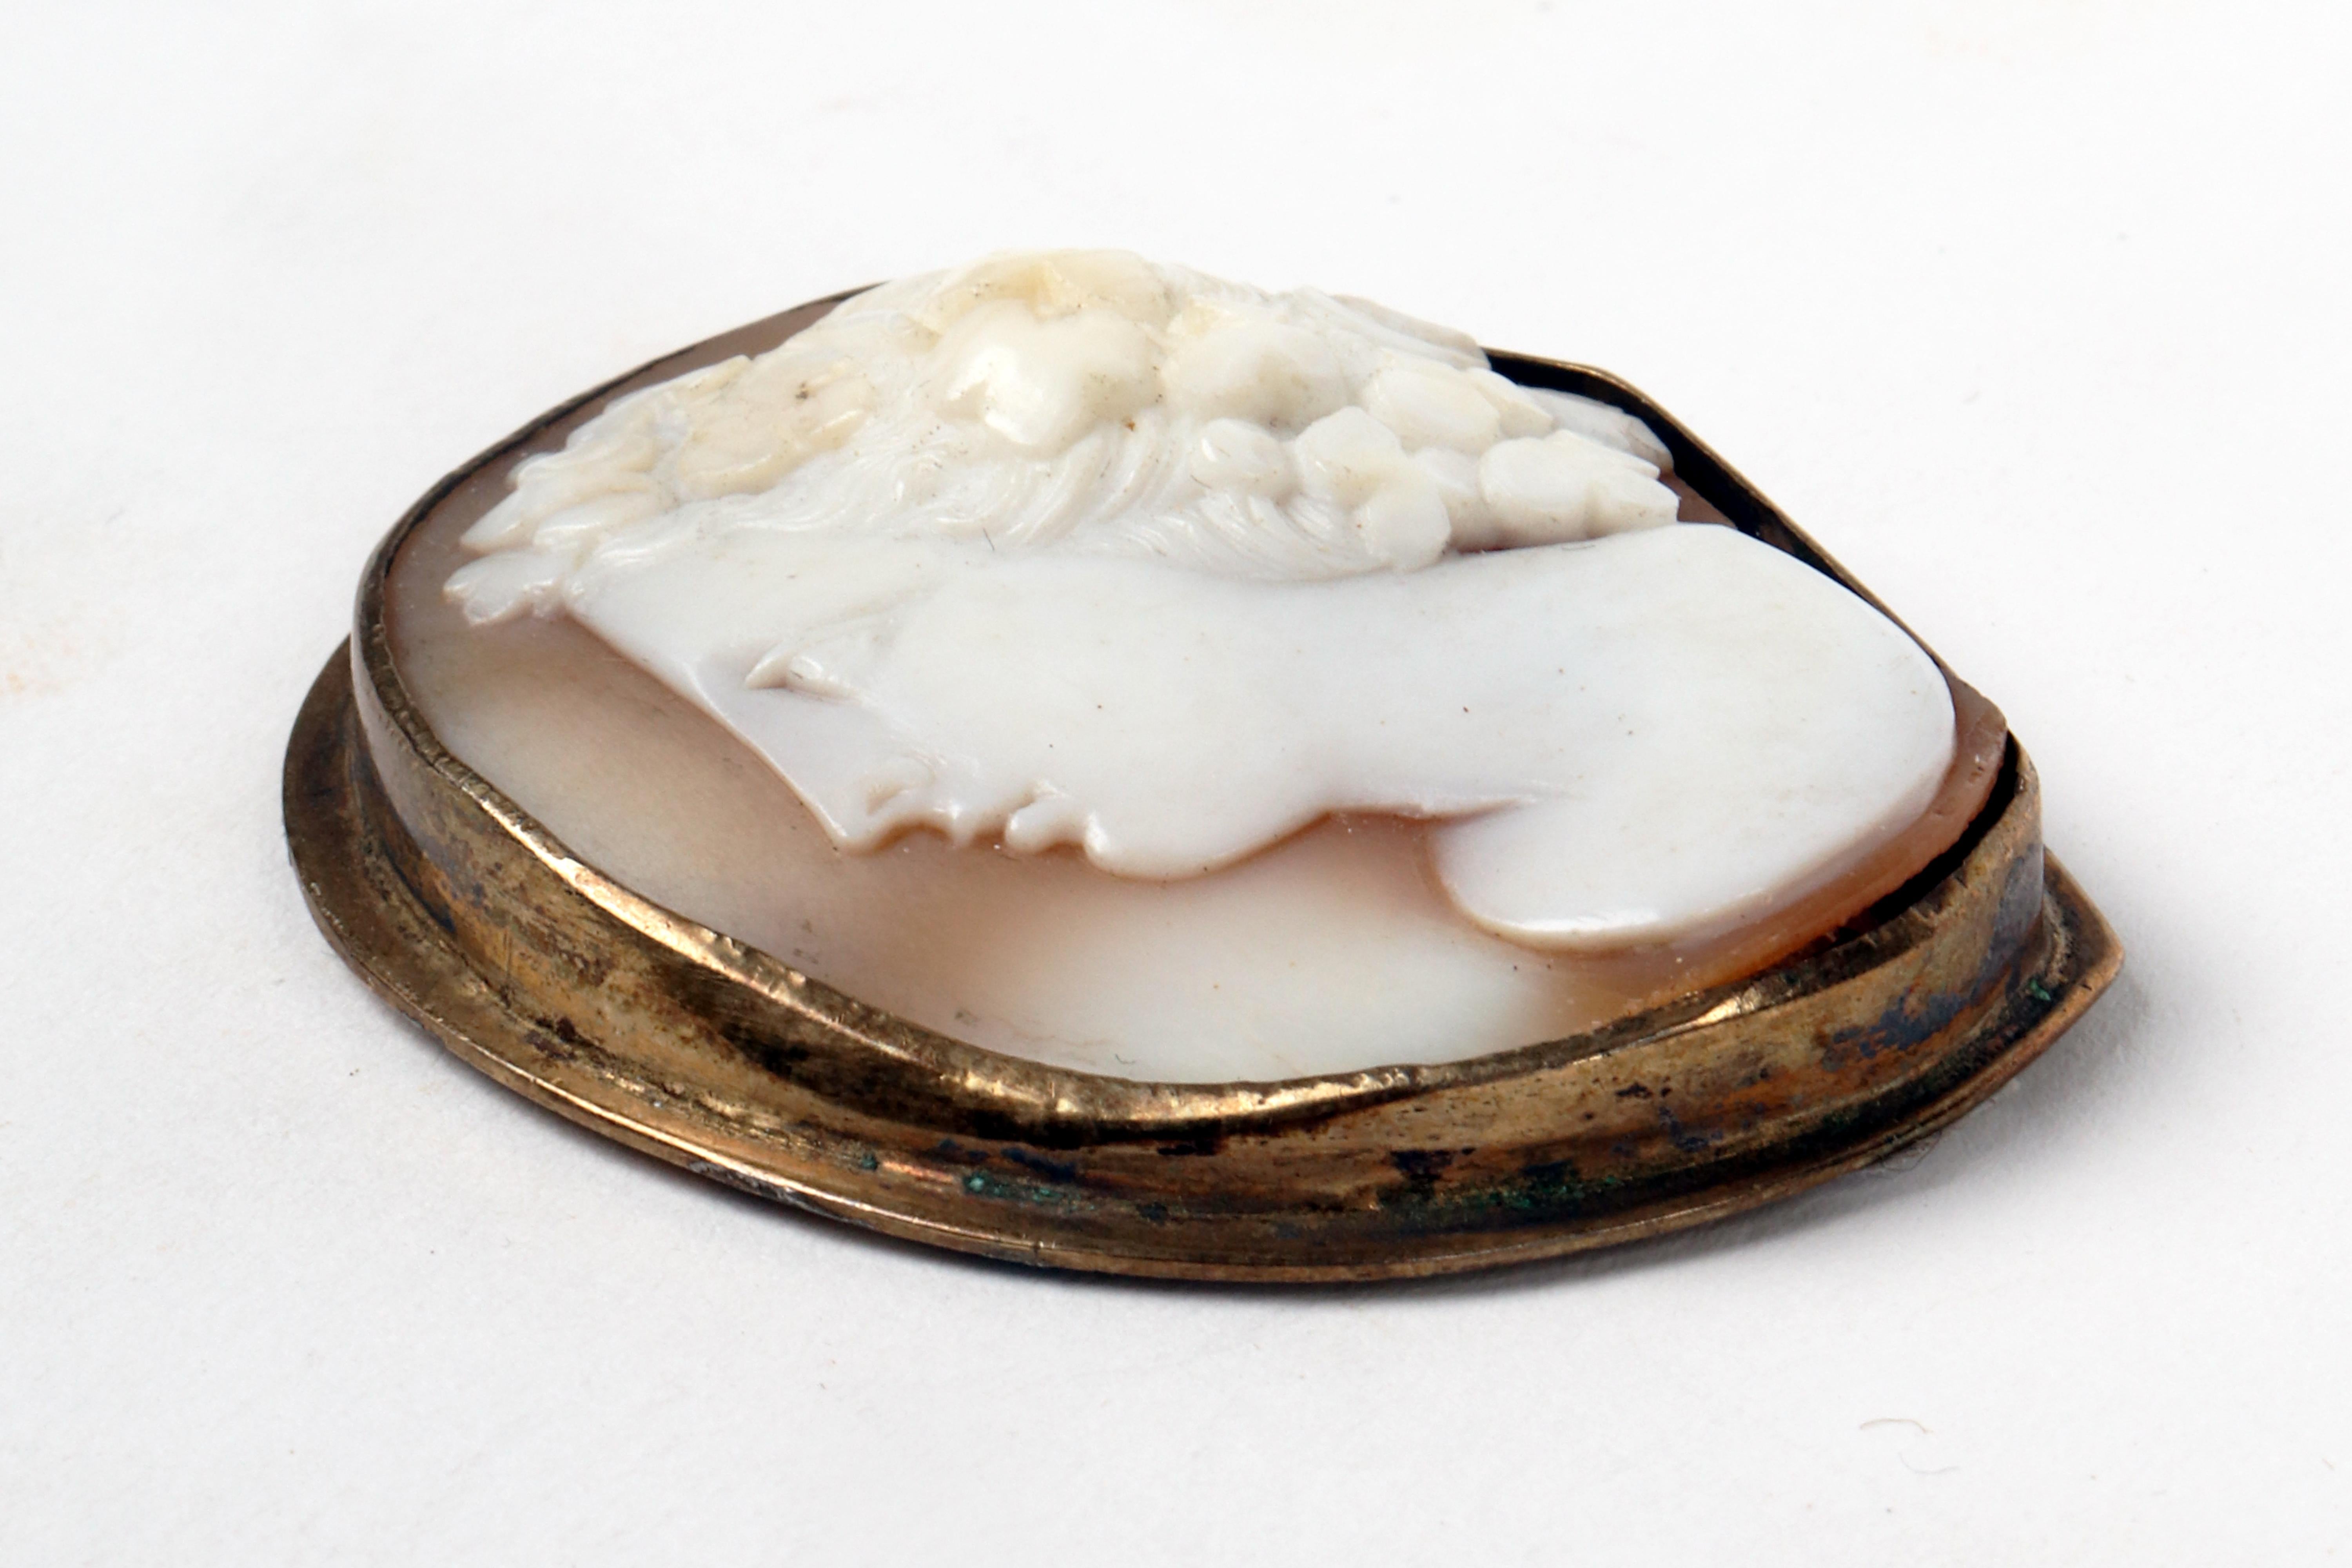 Metal A beautiful shell cameo mounted in golden metal, England 1880. For Sale